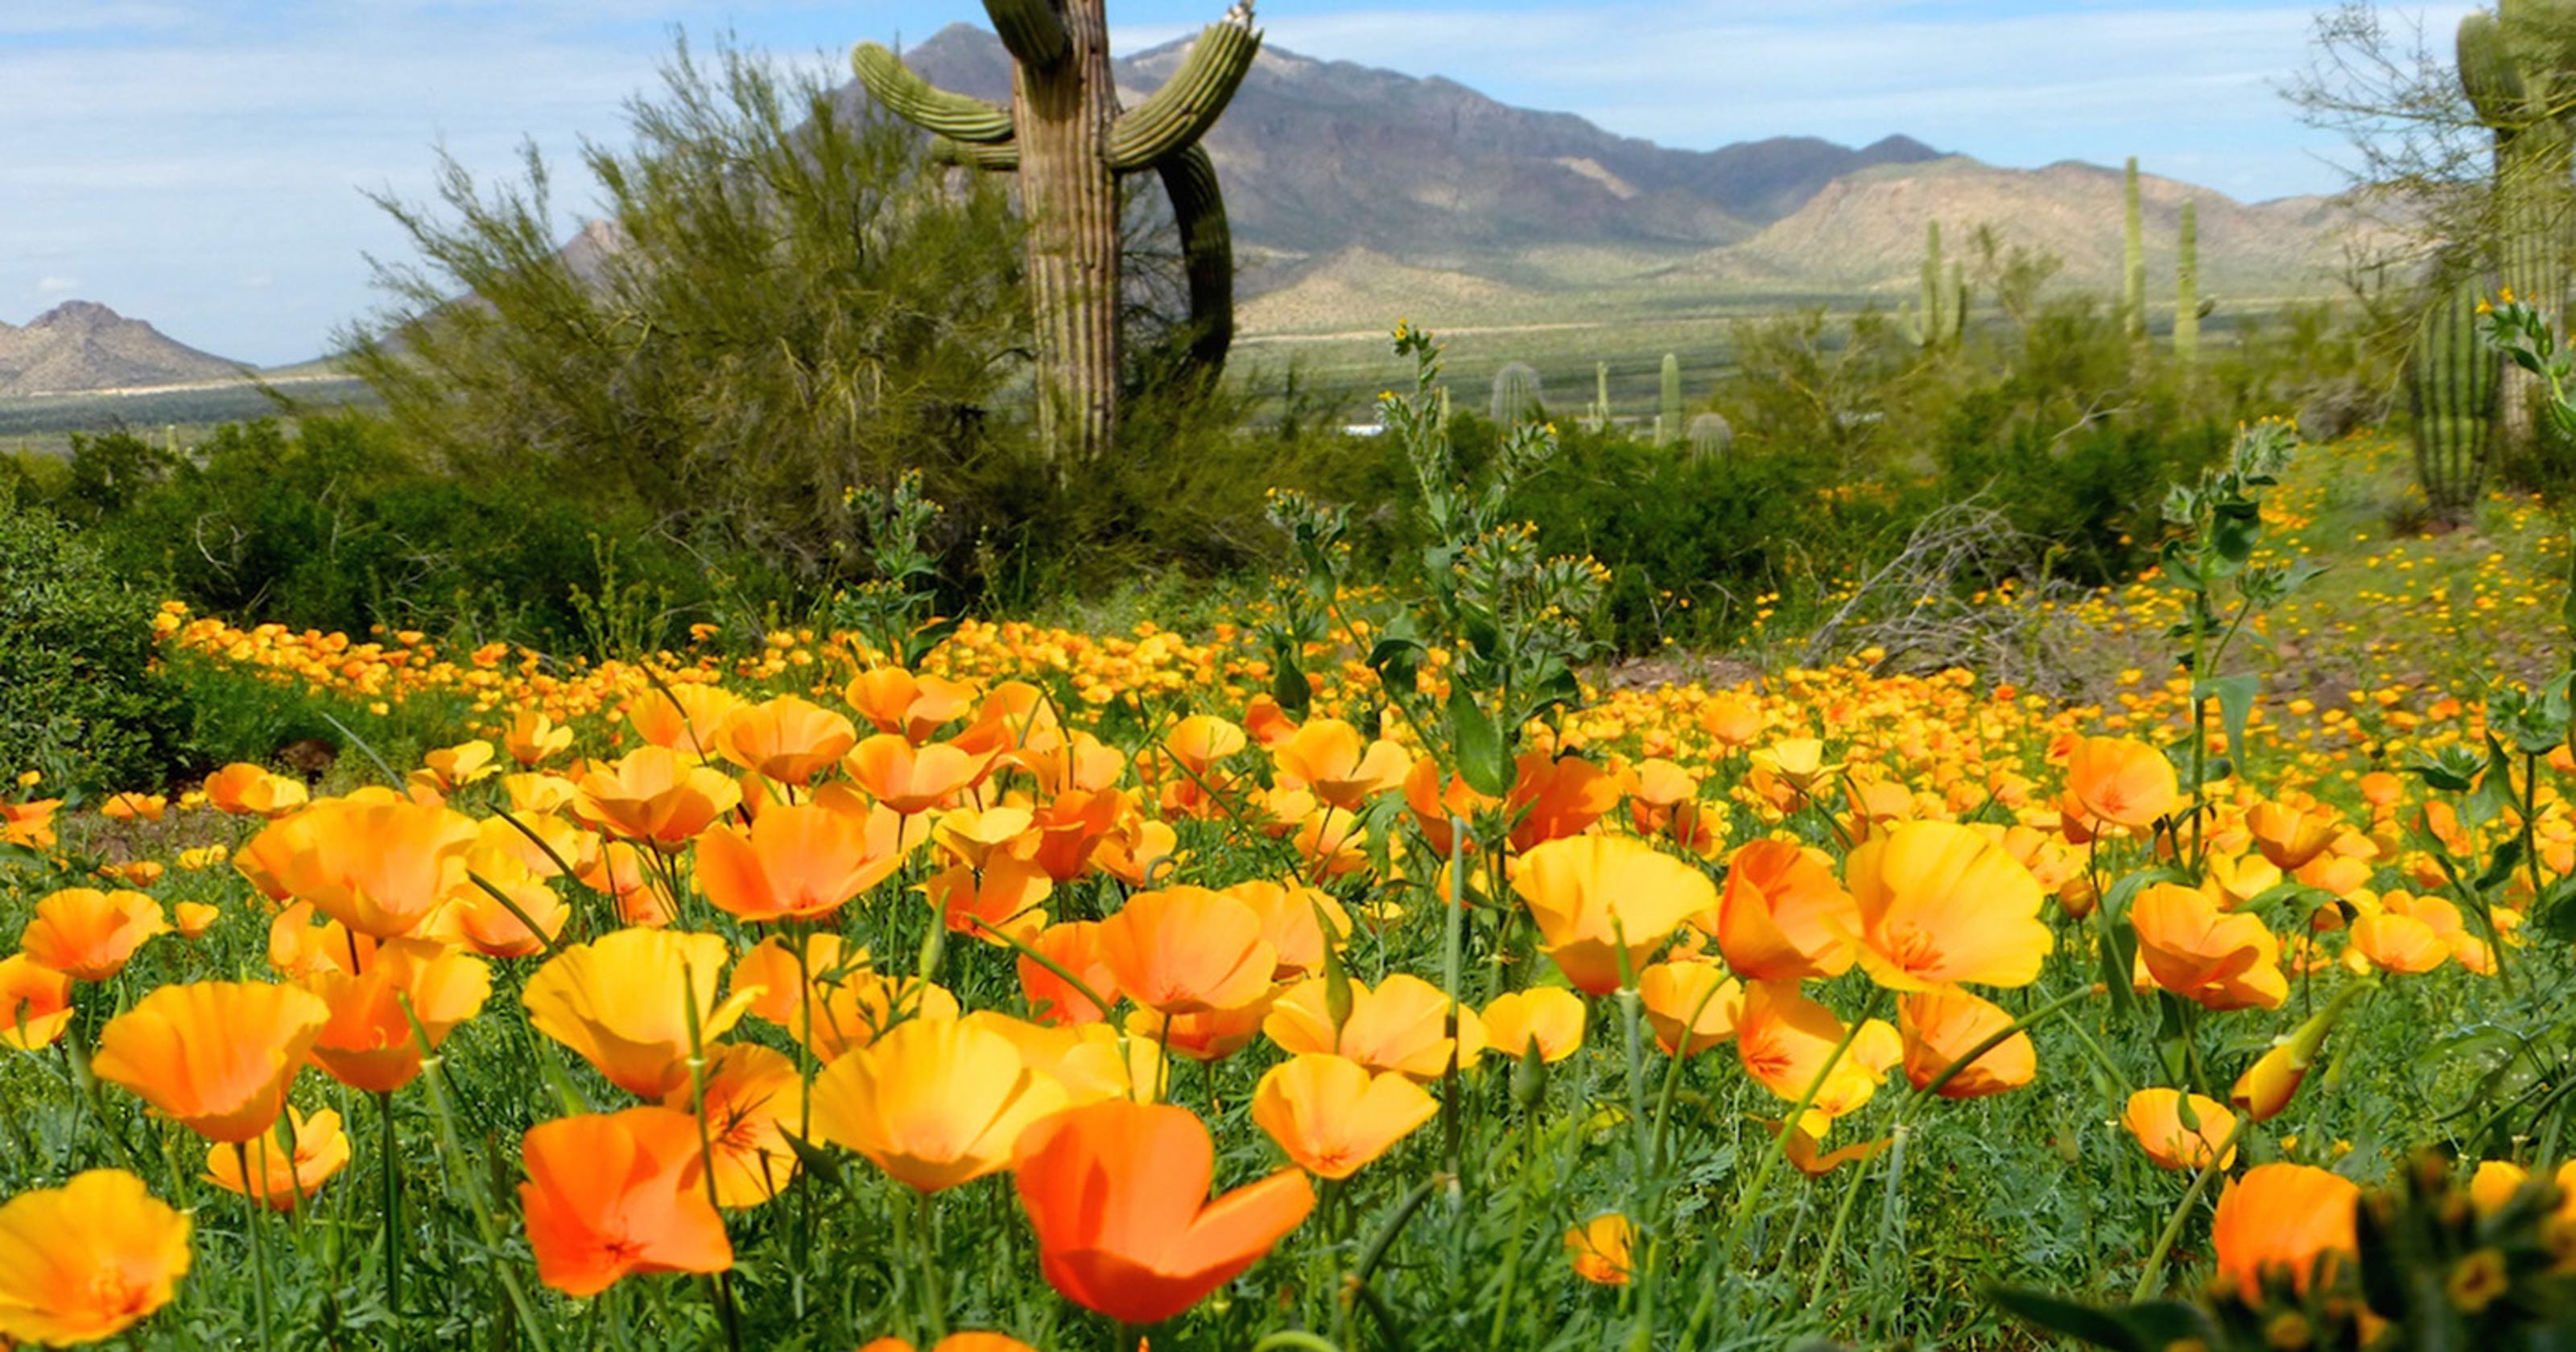 Arizona wildflower forecast Here's why 2019 should be a showy year